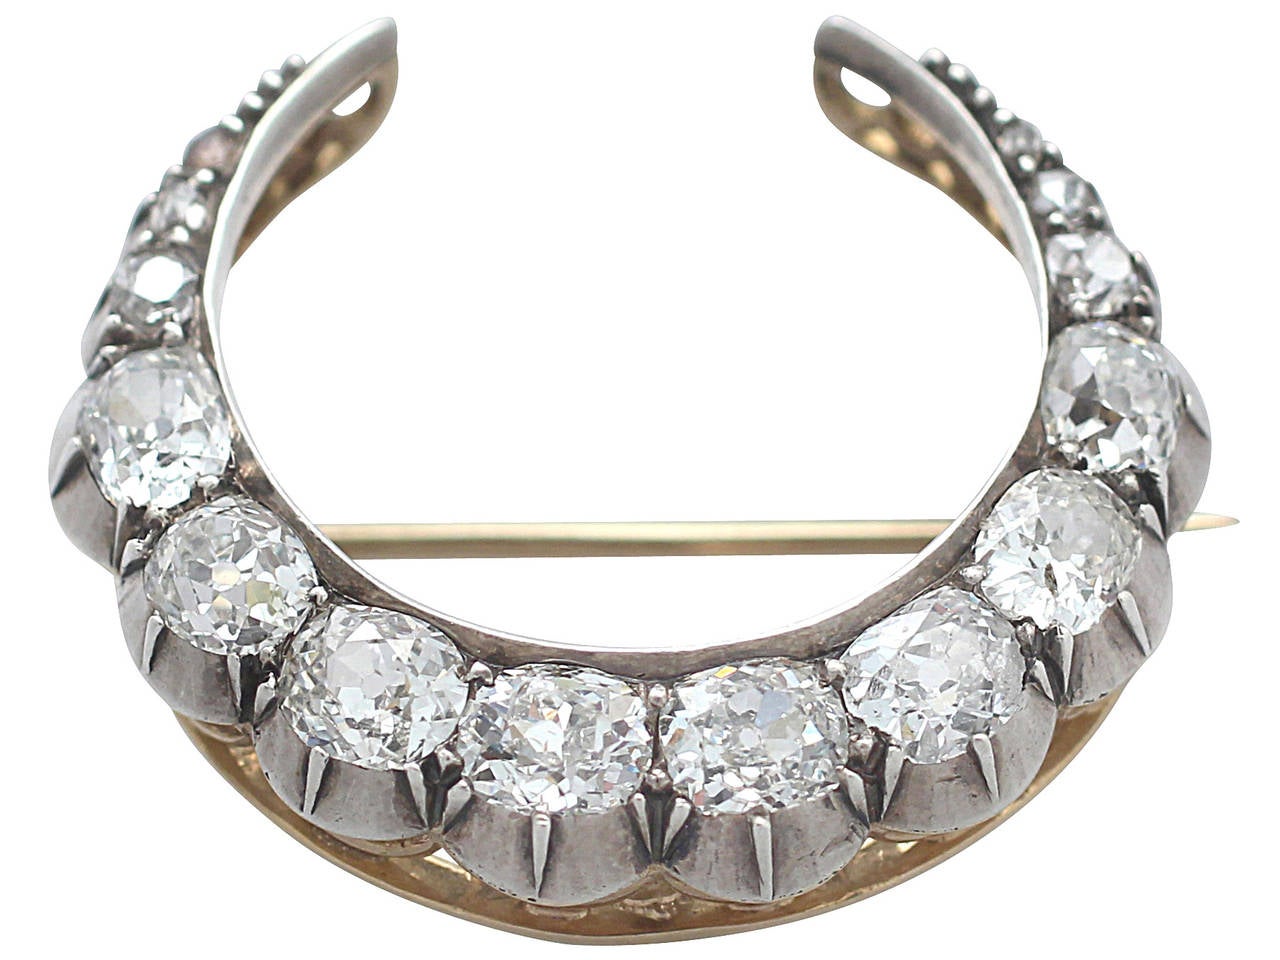 A stunning fine and impressive antique 2.89 carat diamond and 15 karat yellow gold, silver set crescent brooch; part of our diverse antique jewelry and estate jewelry collections

This stunning antique Victorian diamond crescent brooch has been